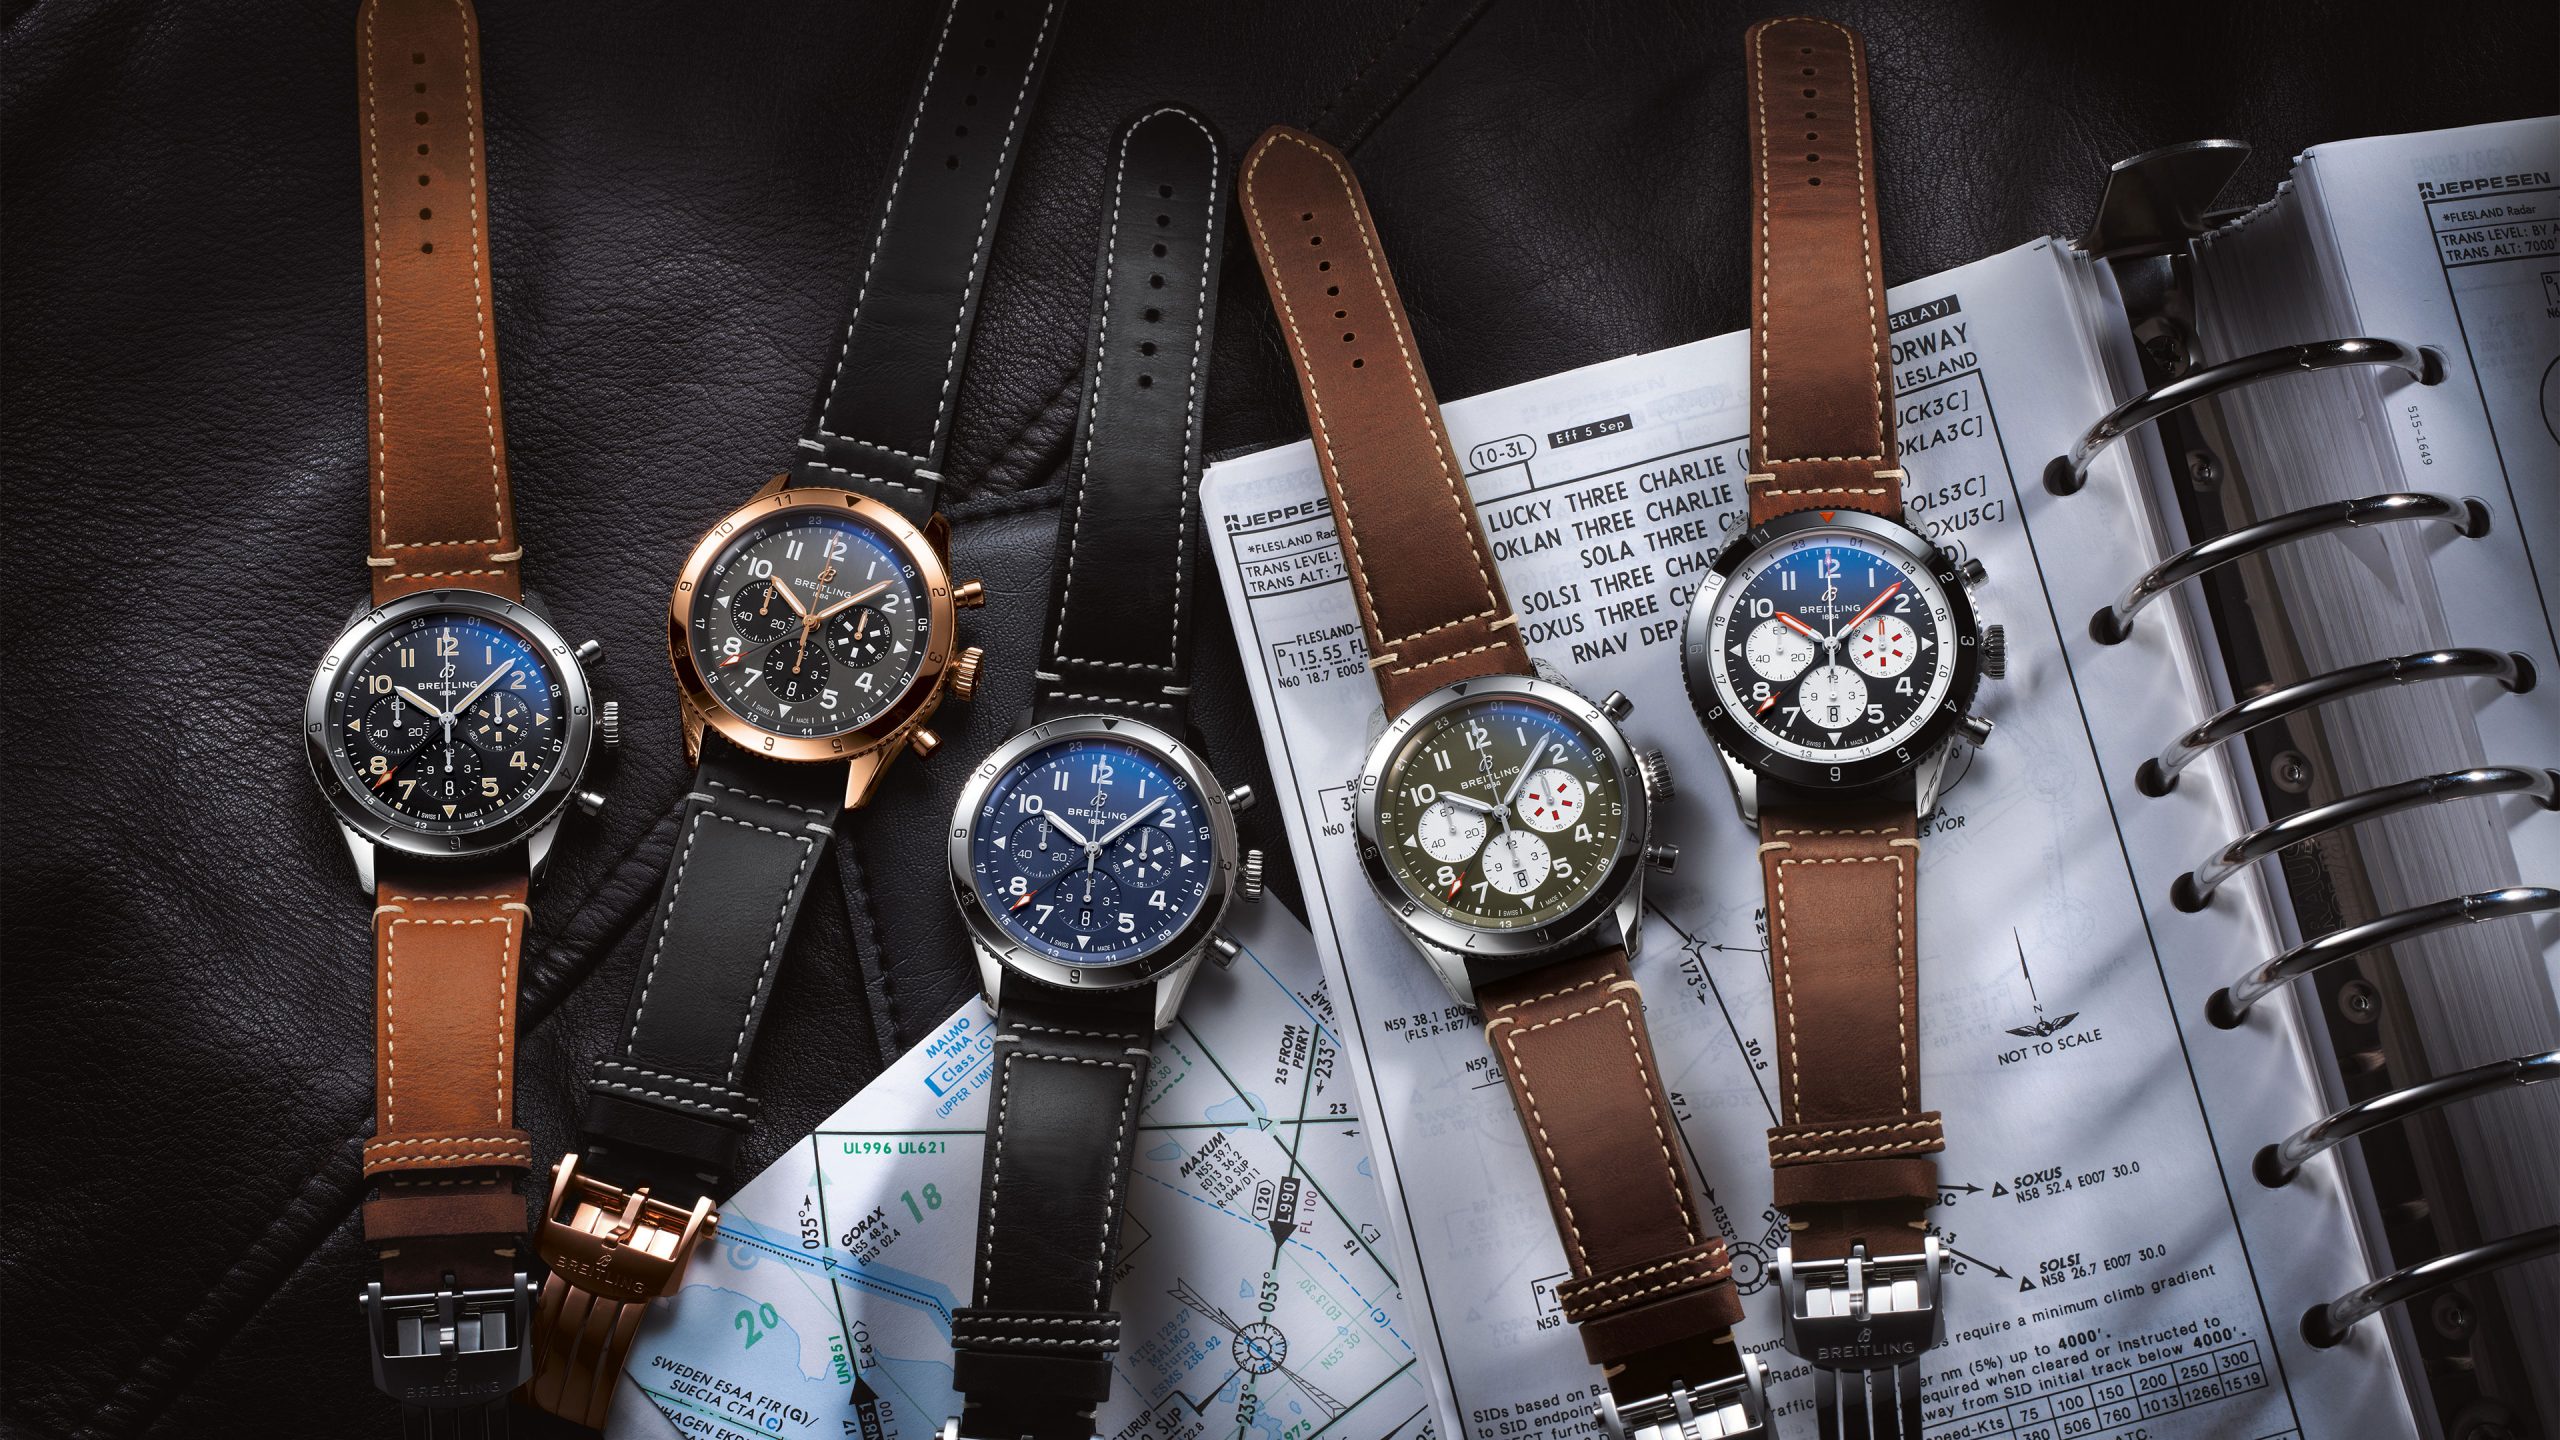 The Breitling Super AVI collection is a celebration of aviation history with designs inspired by the original 1953 aviator’s watch and four legendary planes